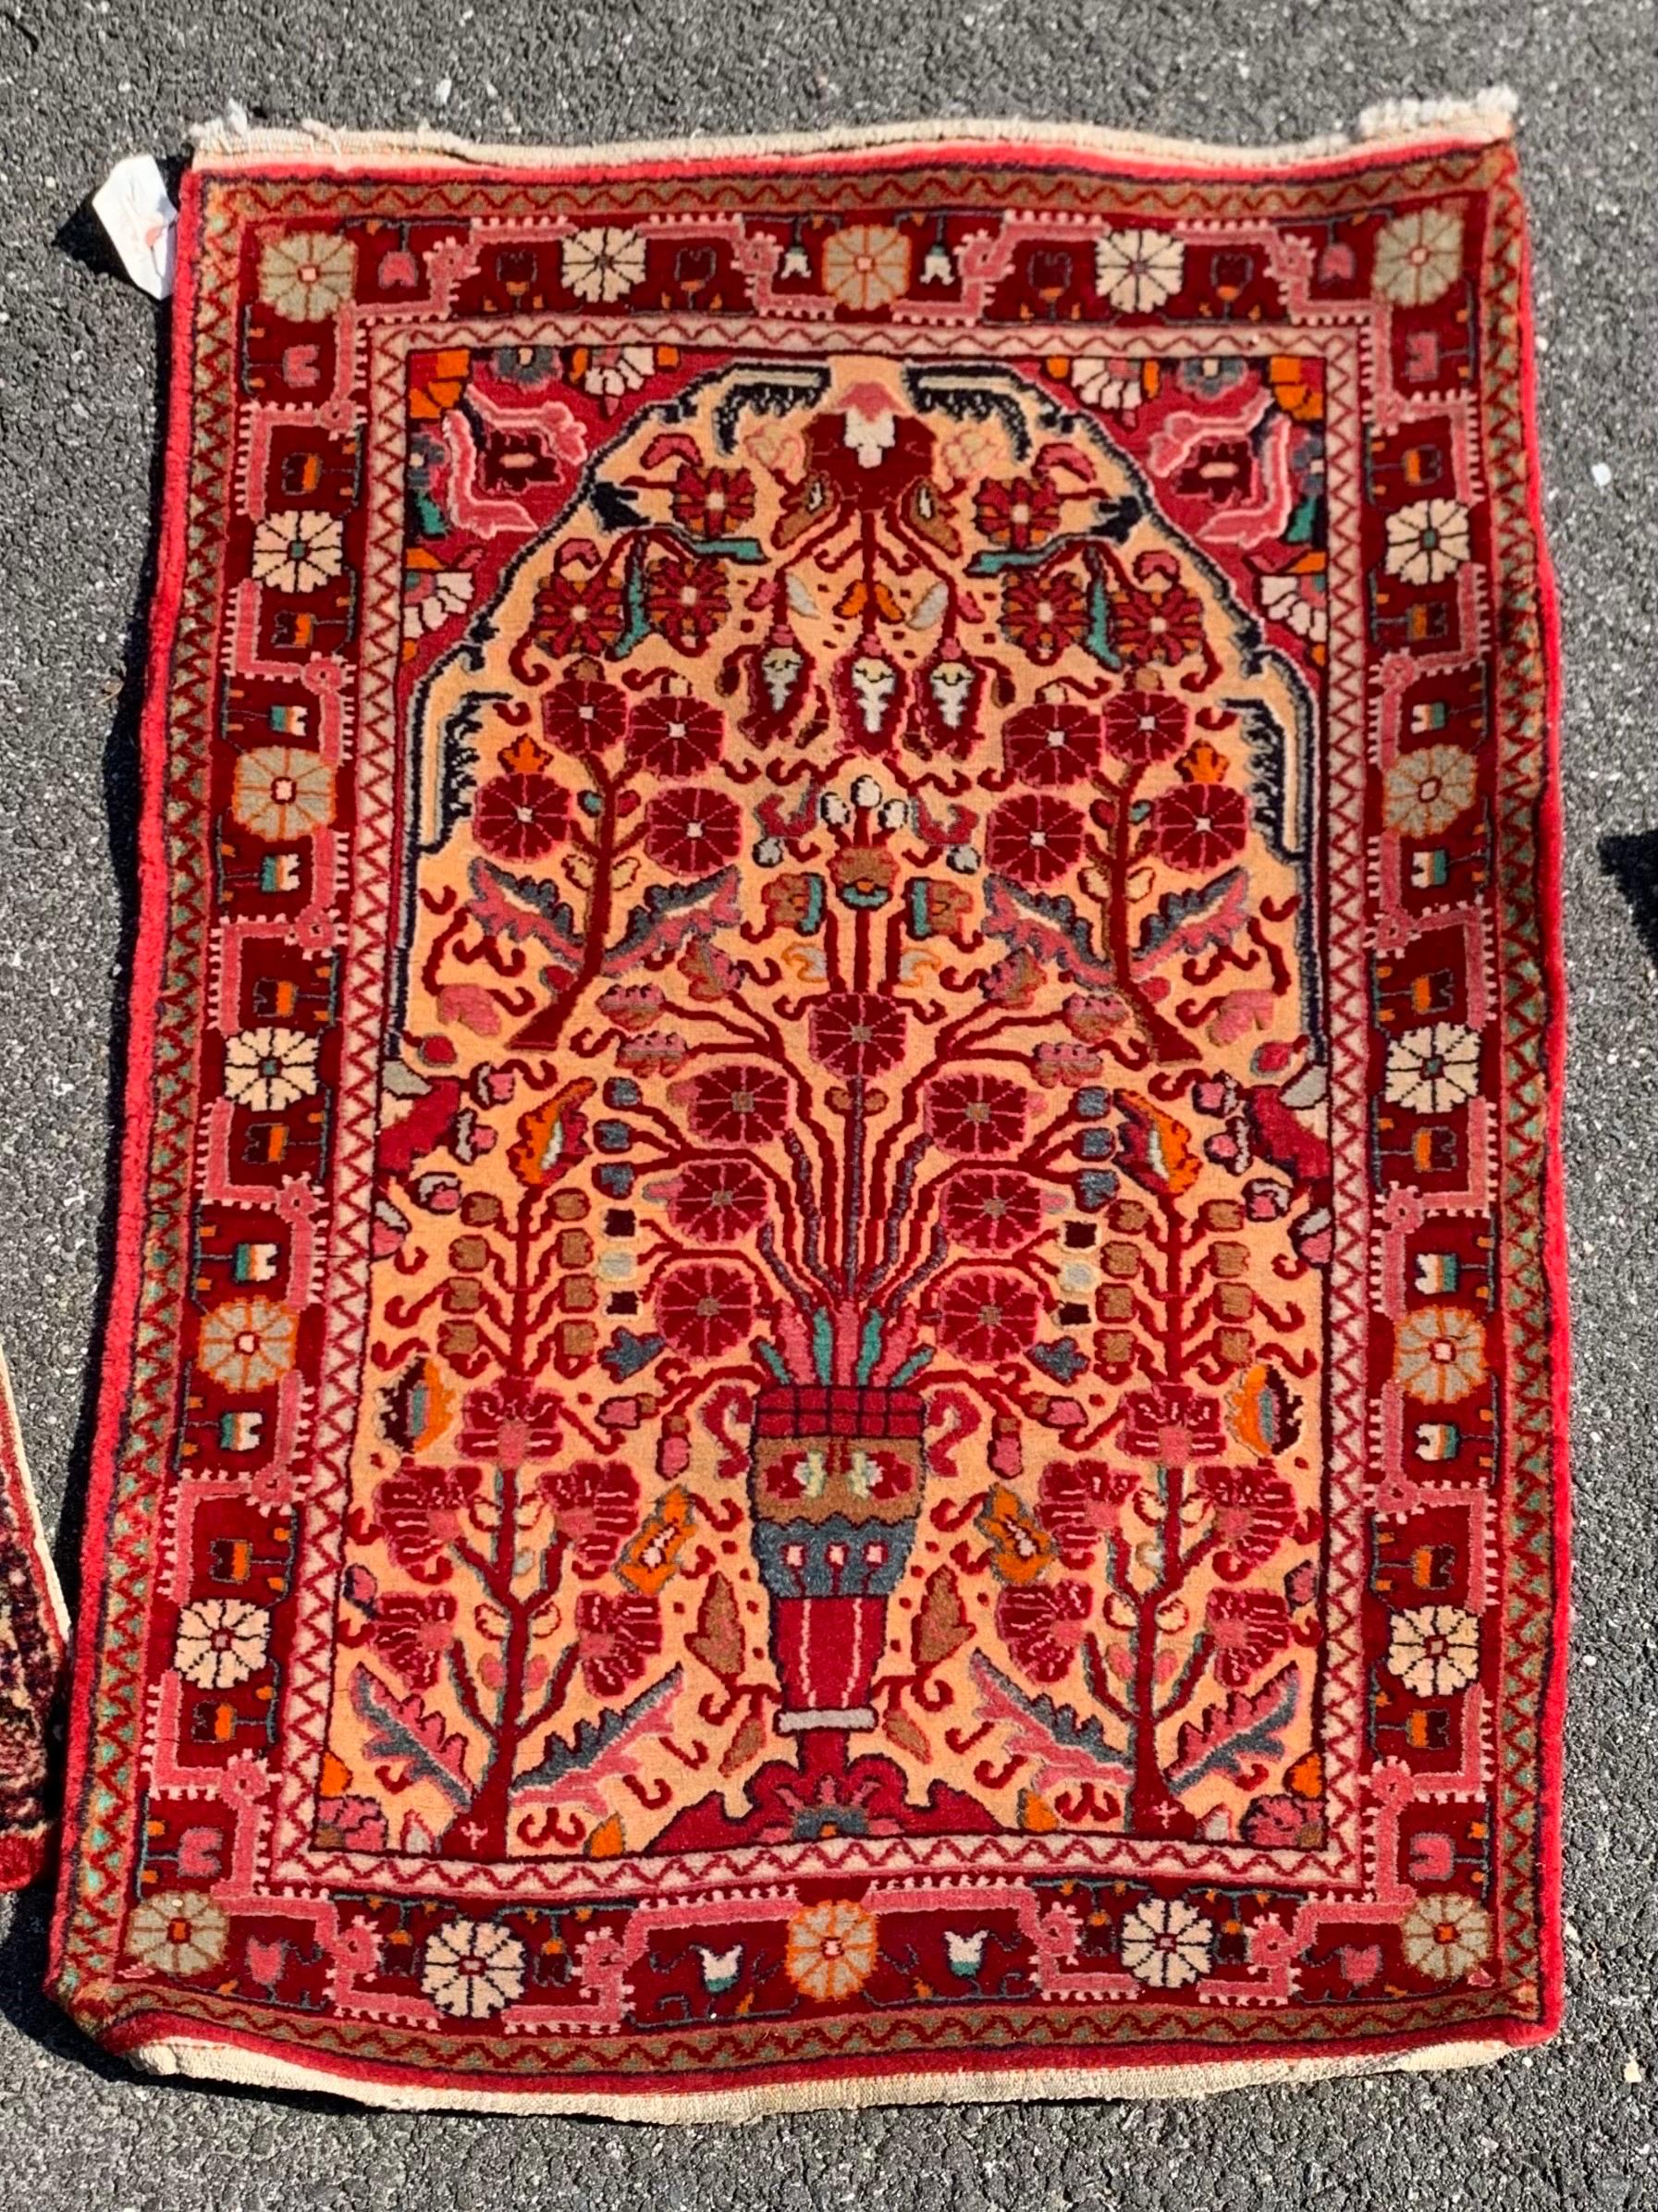 Pristine Antique Embroidered Sarouk dating from the 1920s measuring 2 x 3 ft.
